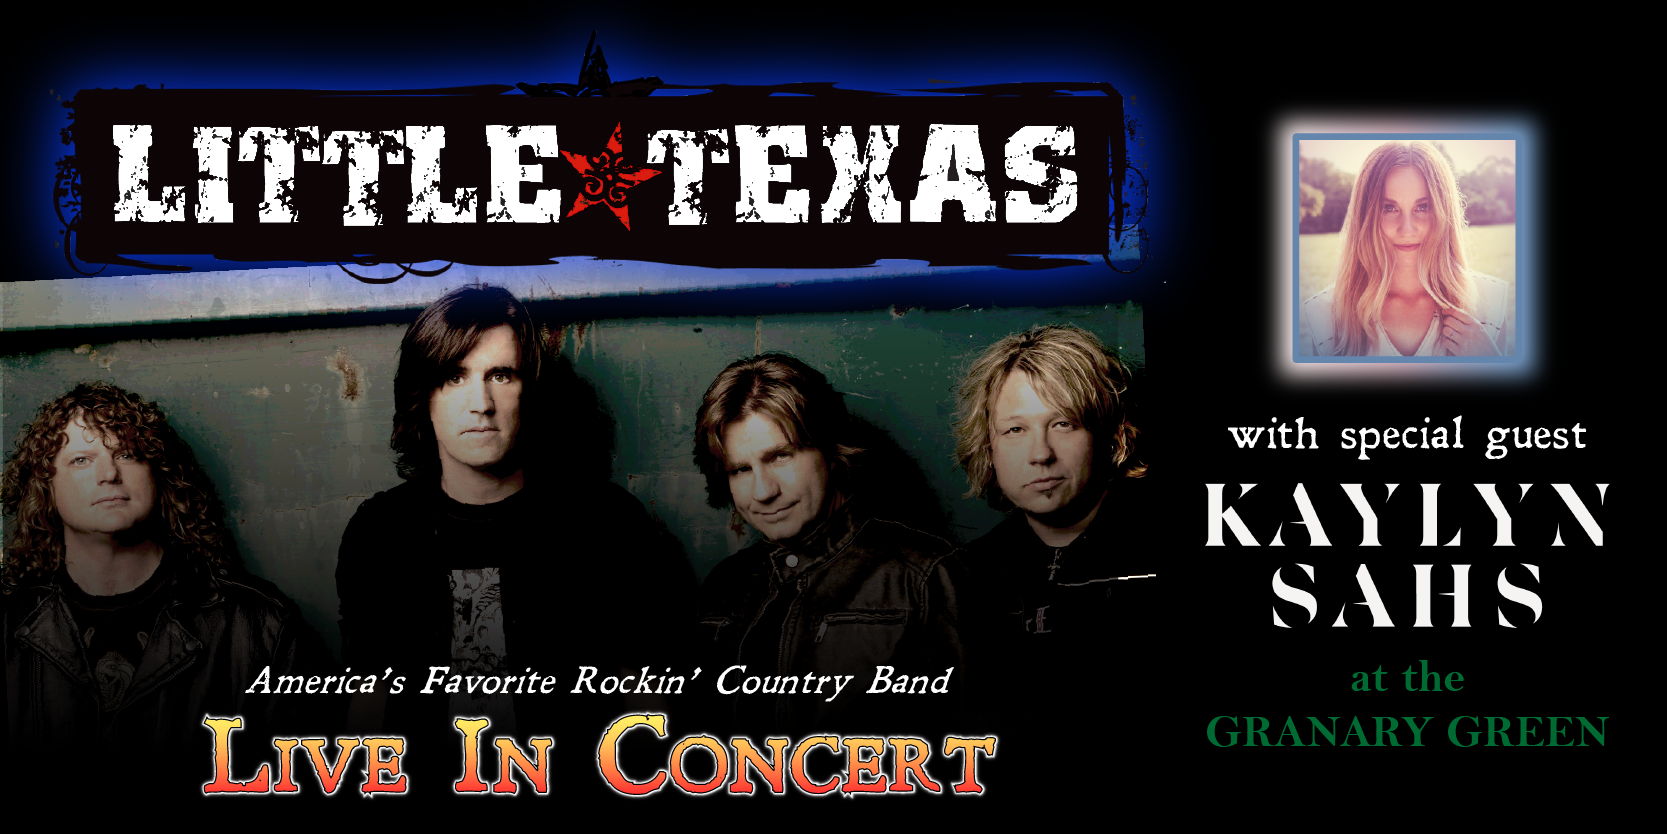 Little Texas Live in Concert with Kaylyn Sahs promotional image